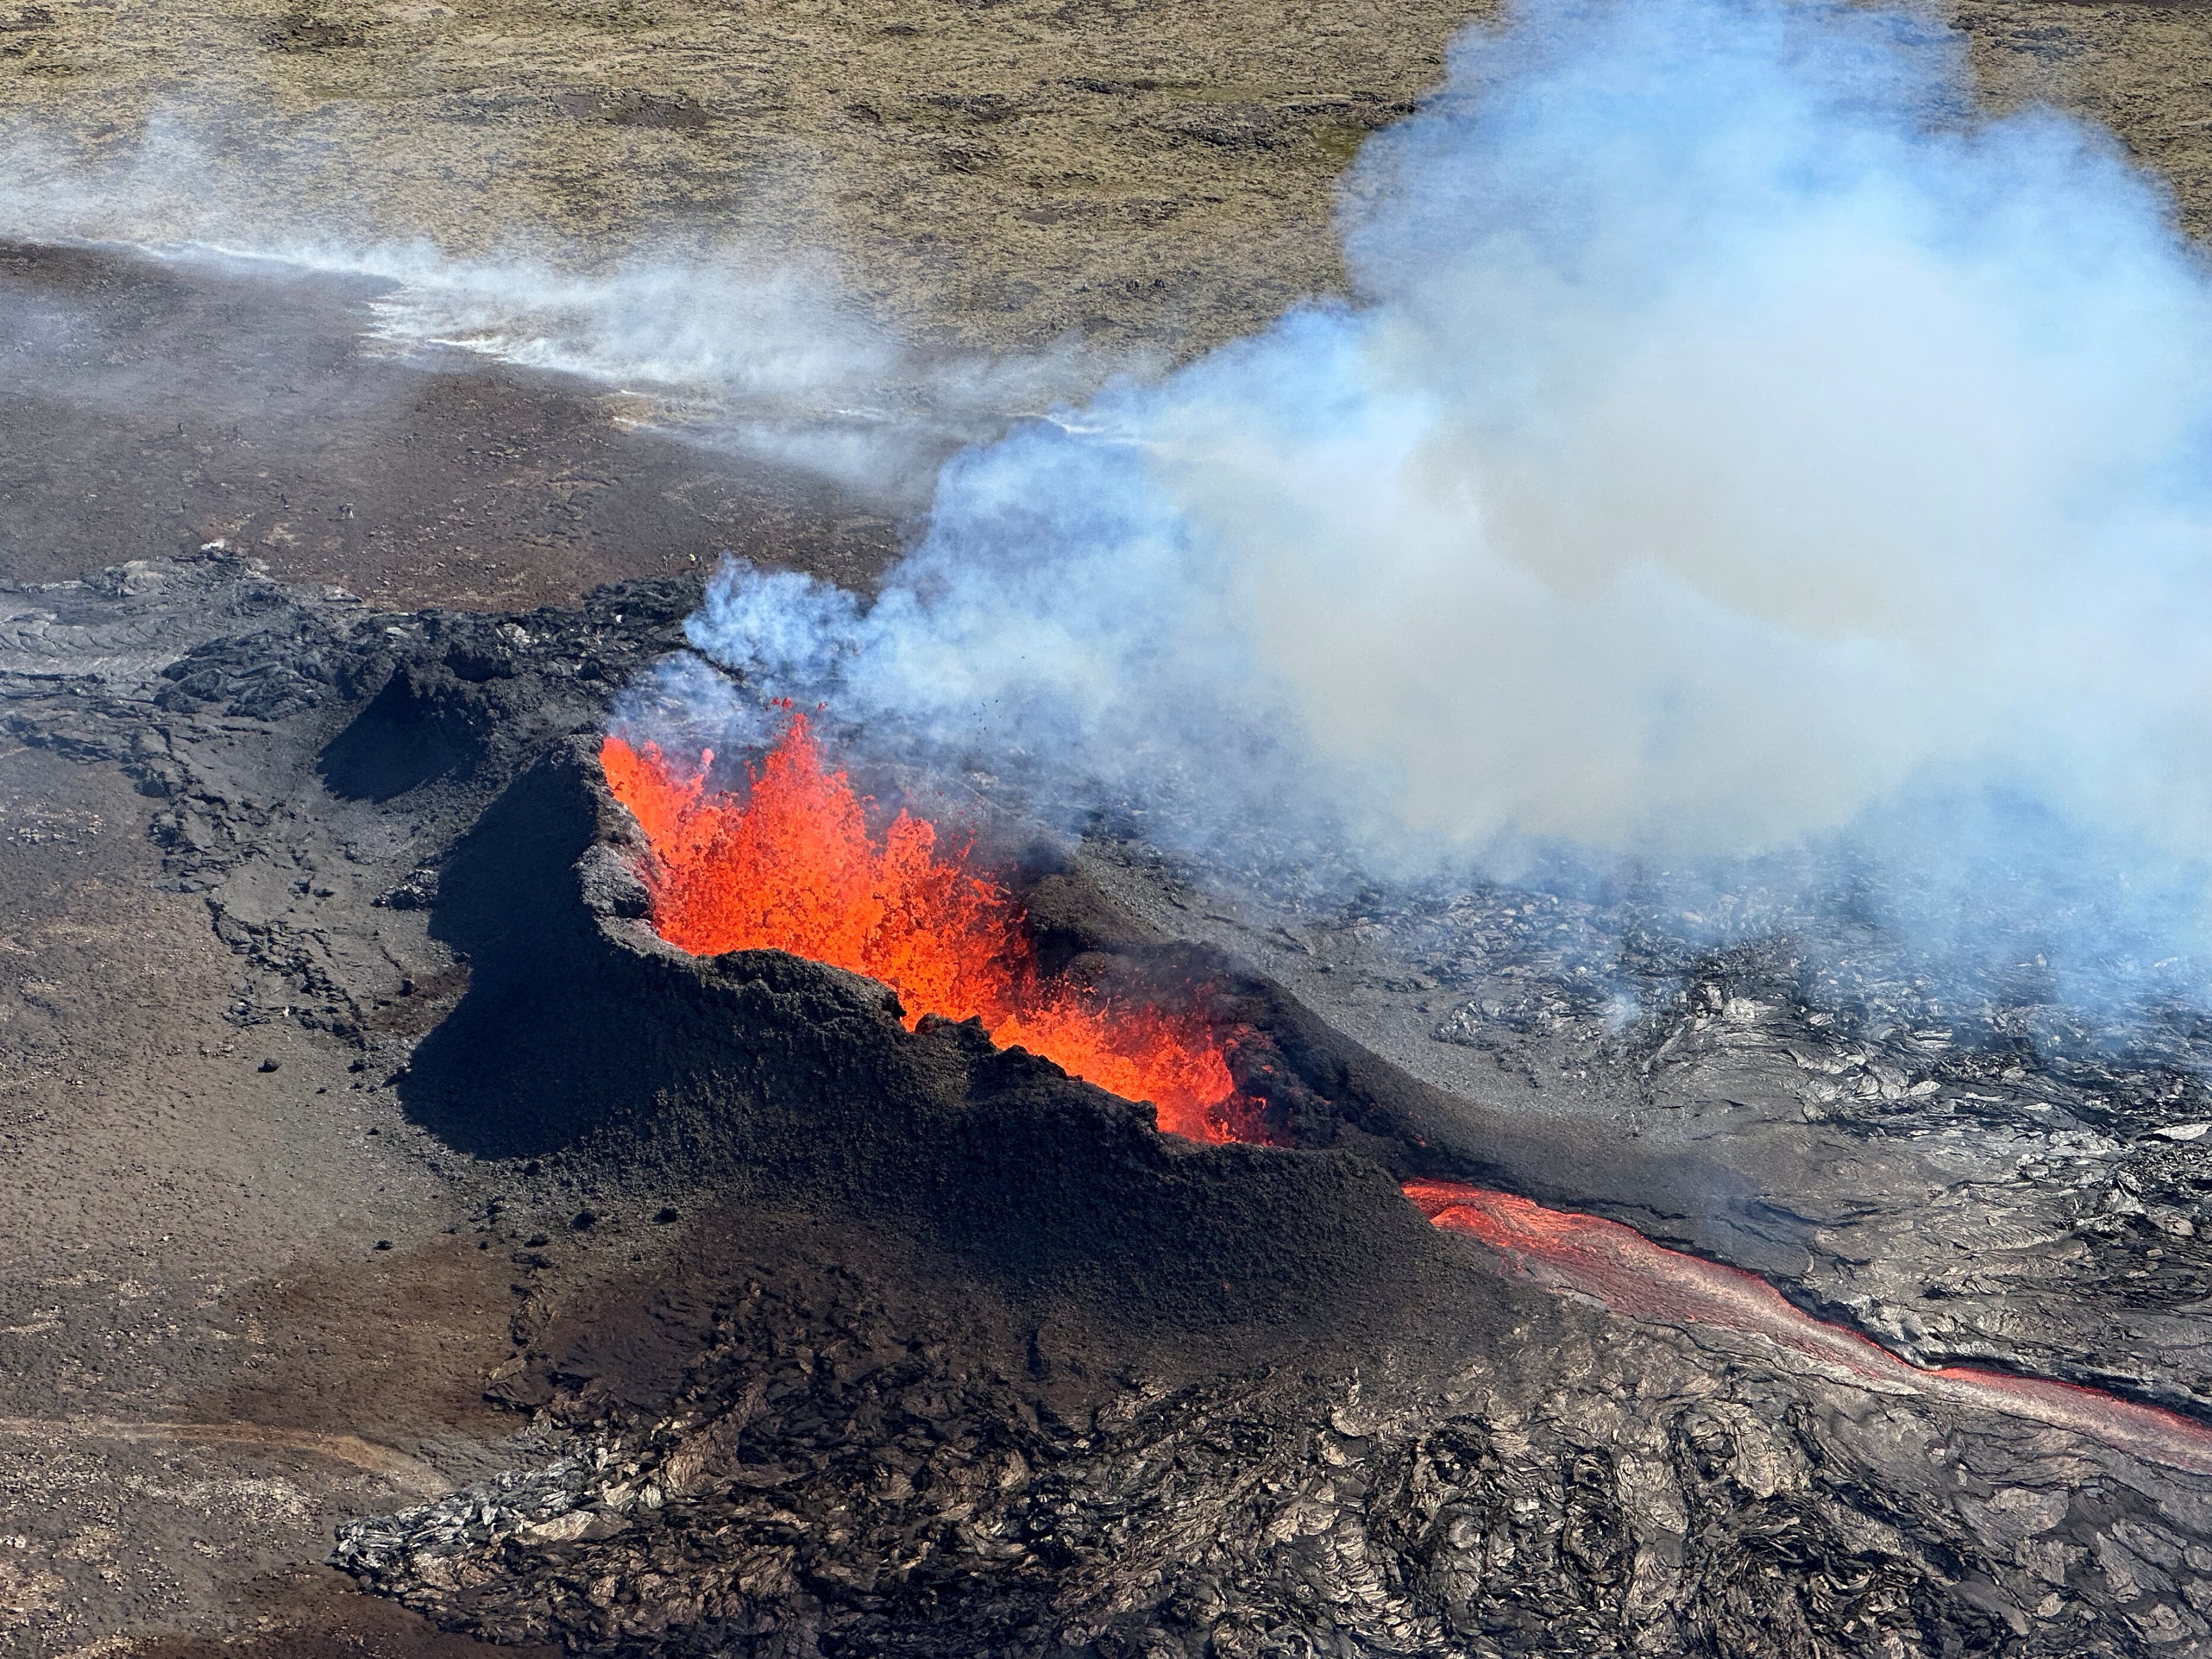 New guidelines have been drawn up since an eruption caused an aviation shutdown